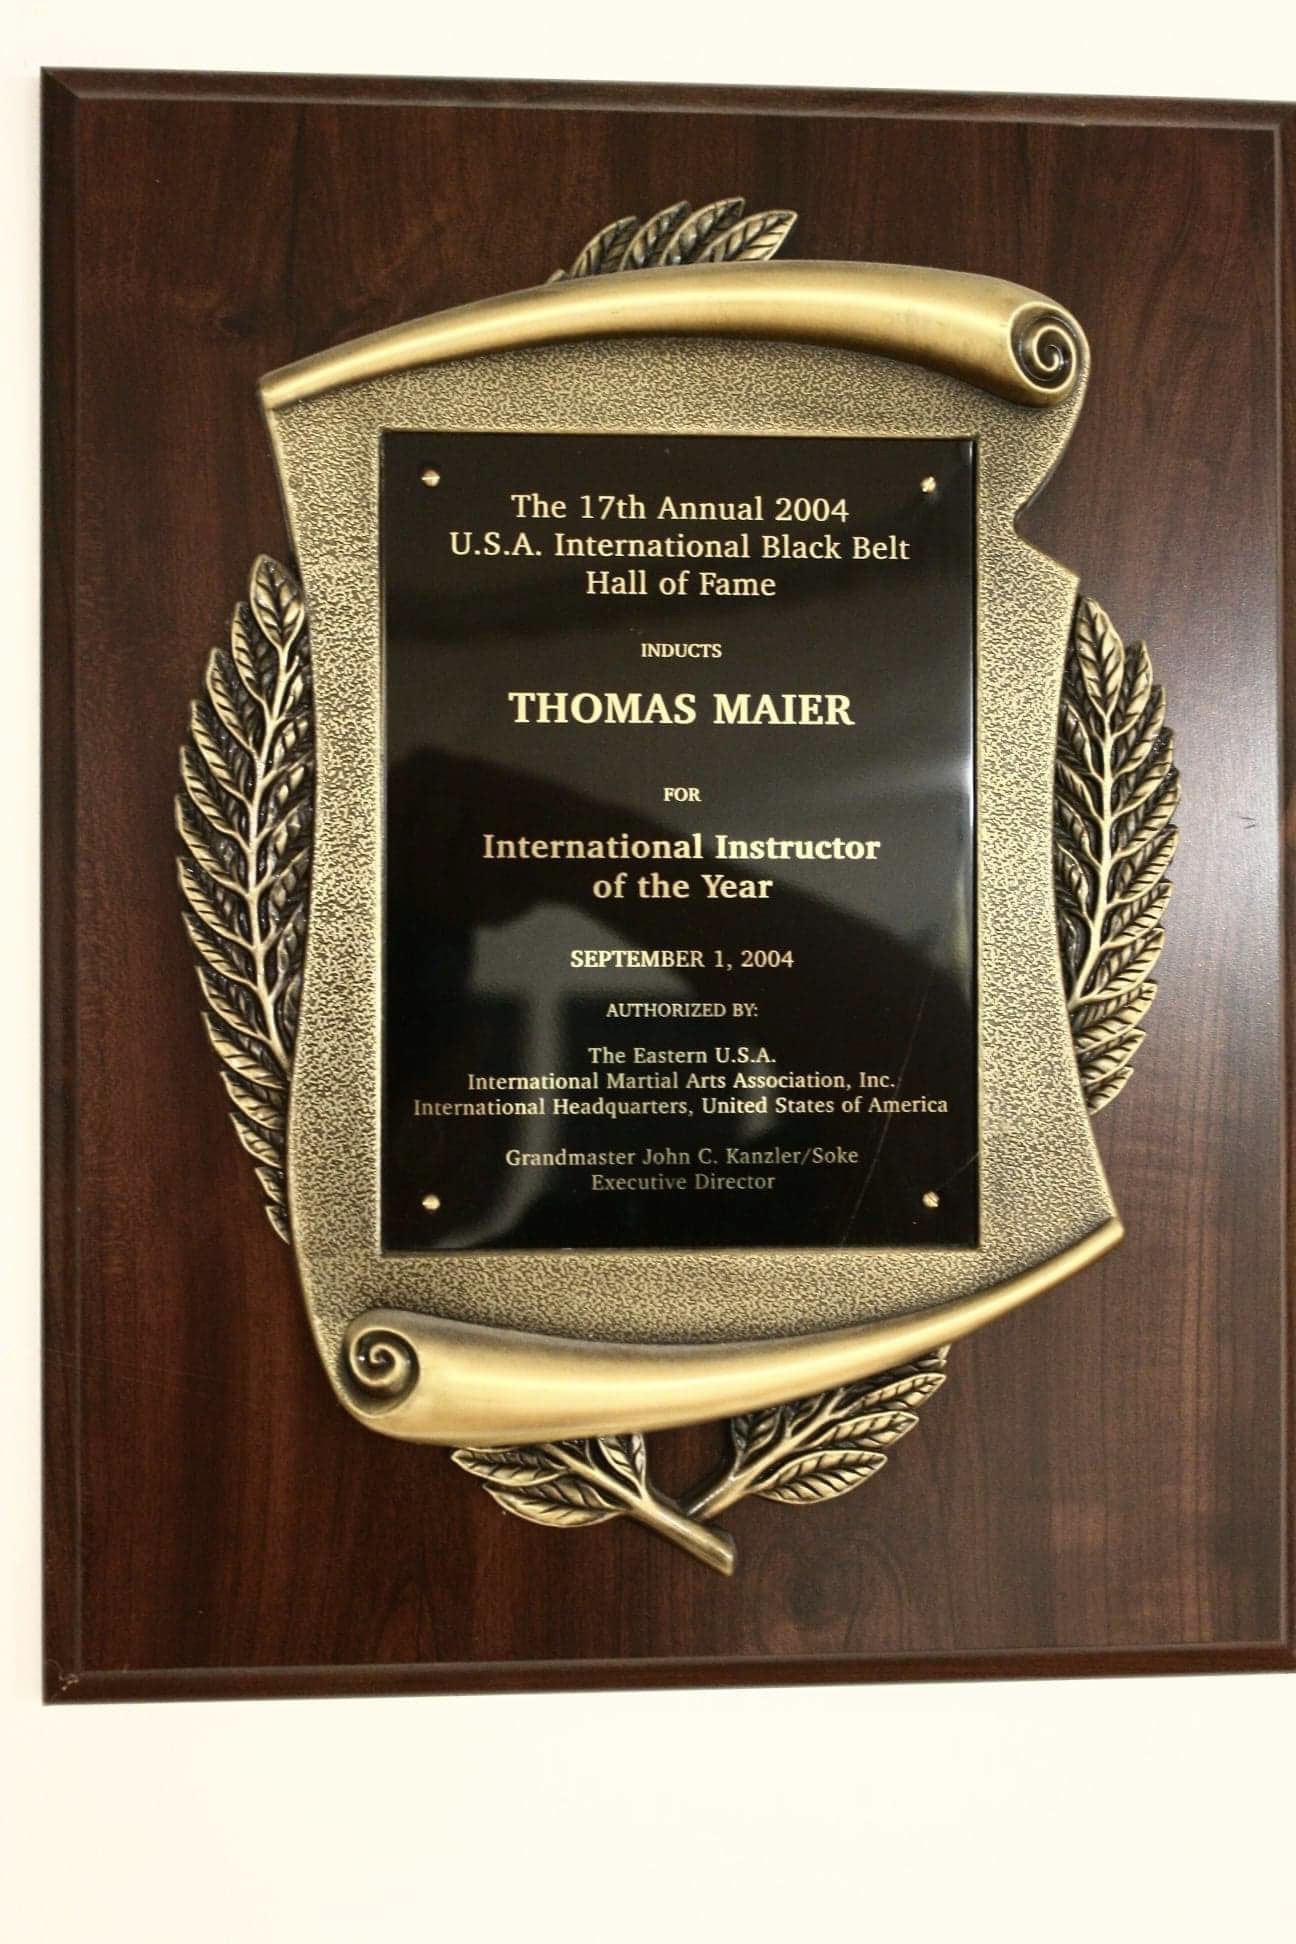 Master Thomas Maier Int. Instructor of the Year